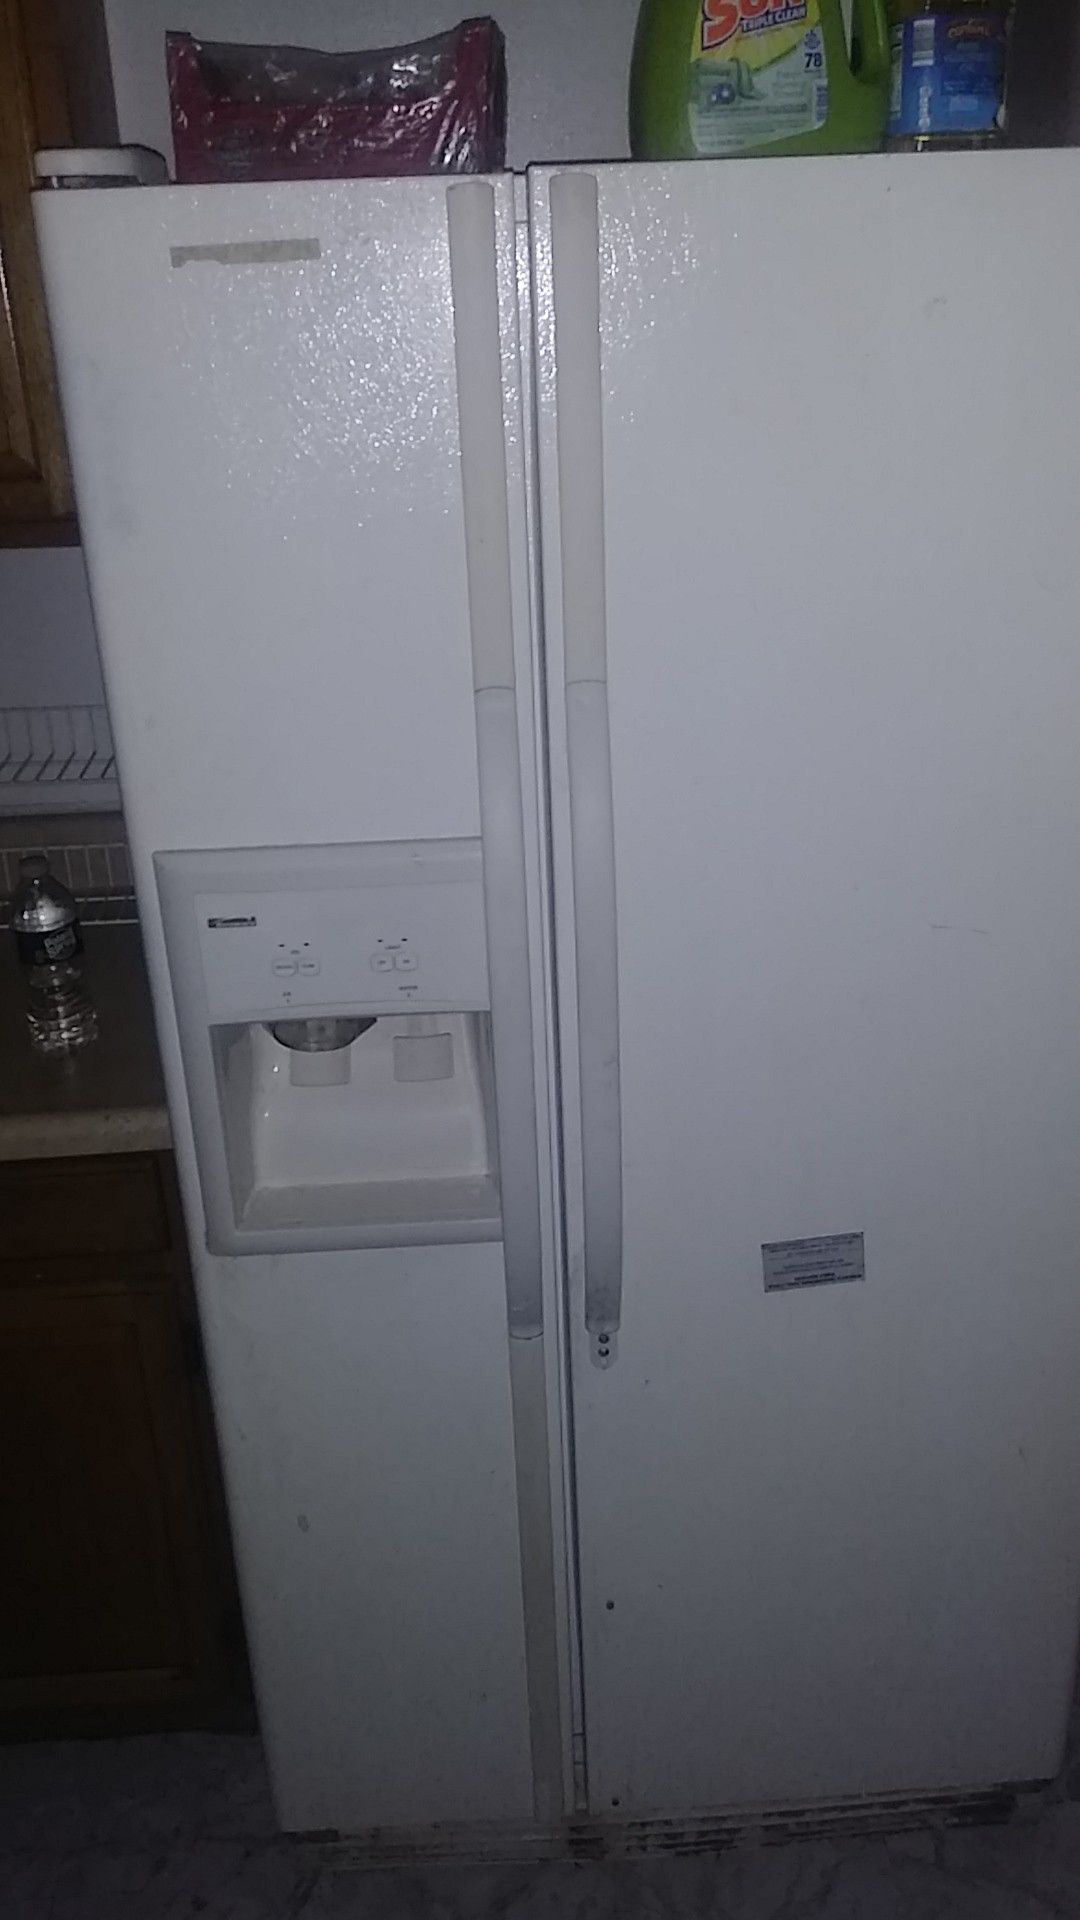 A used refrigerator that works good